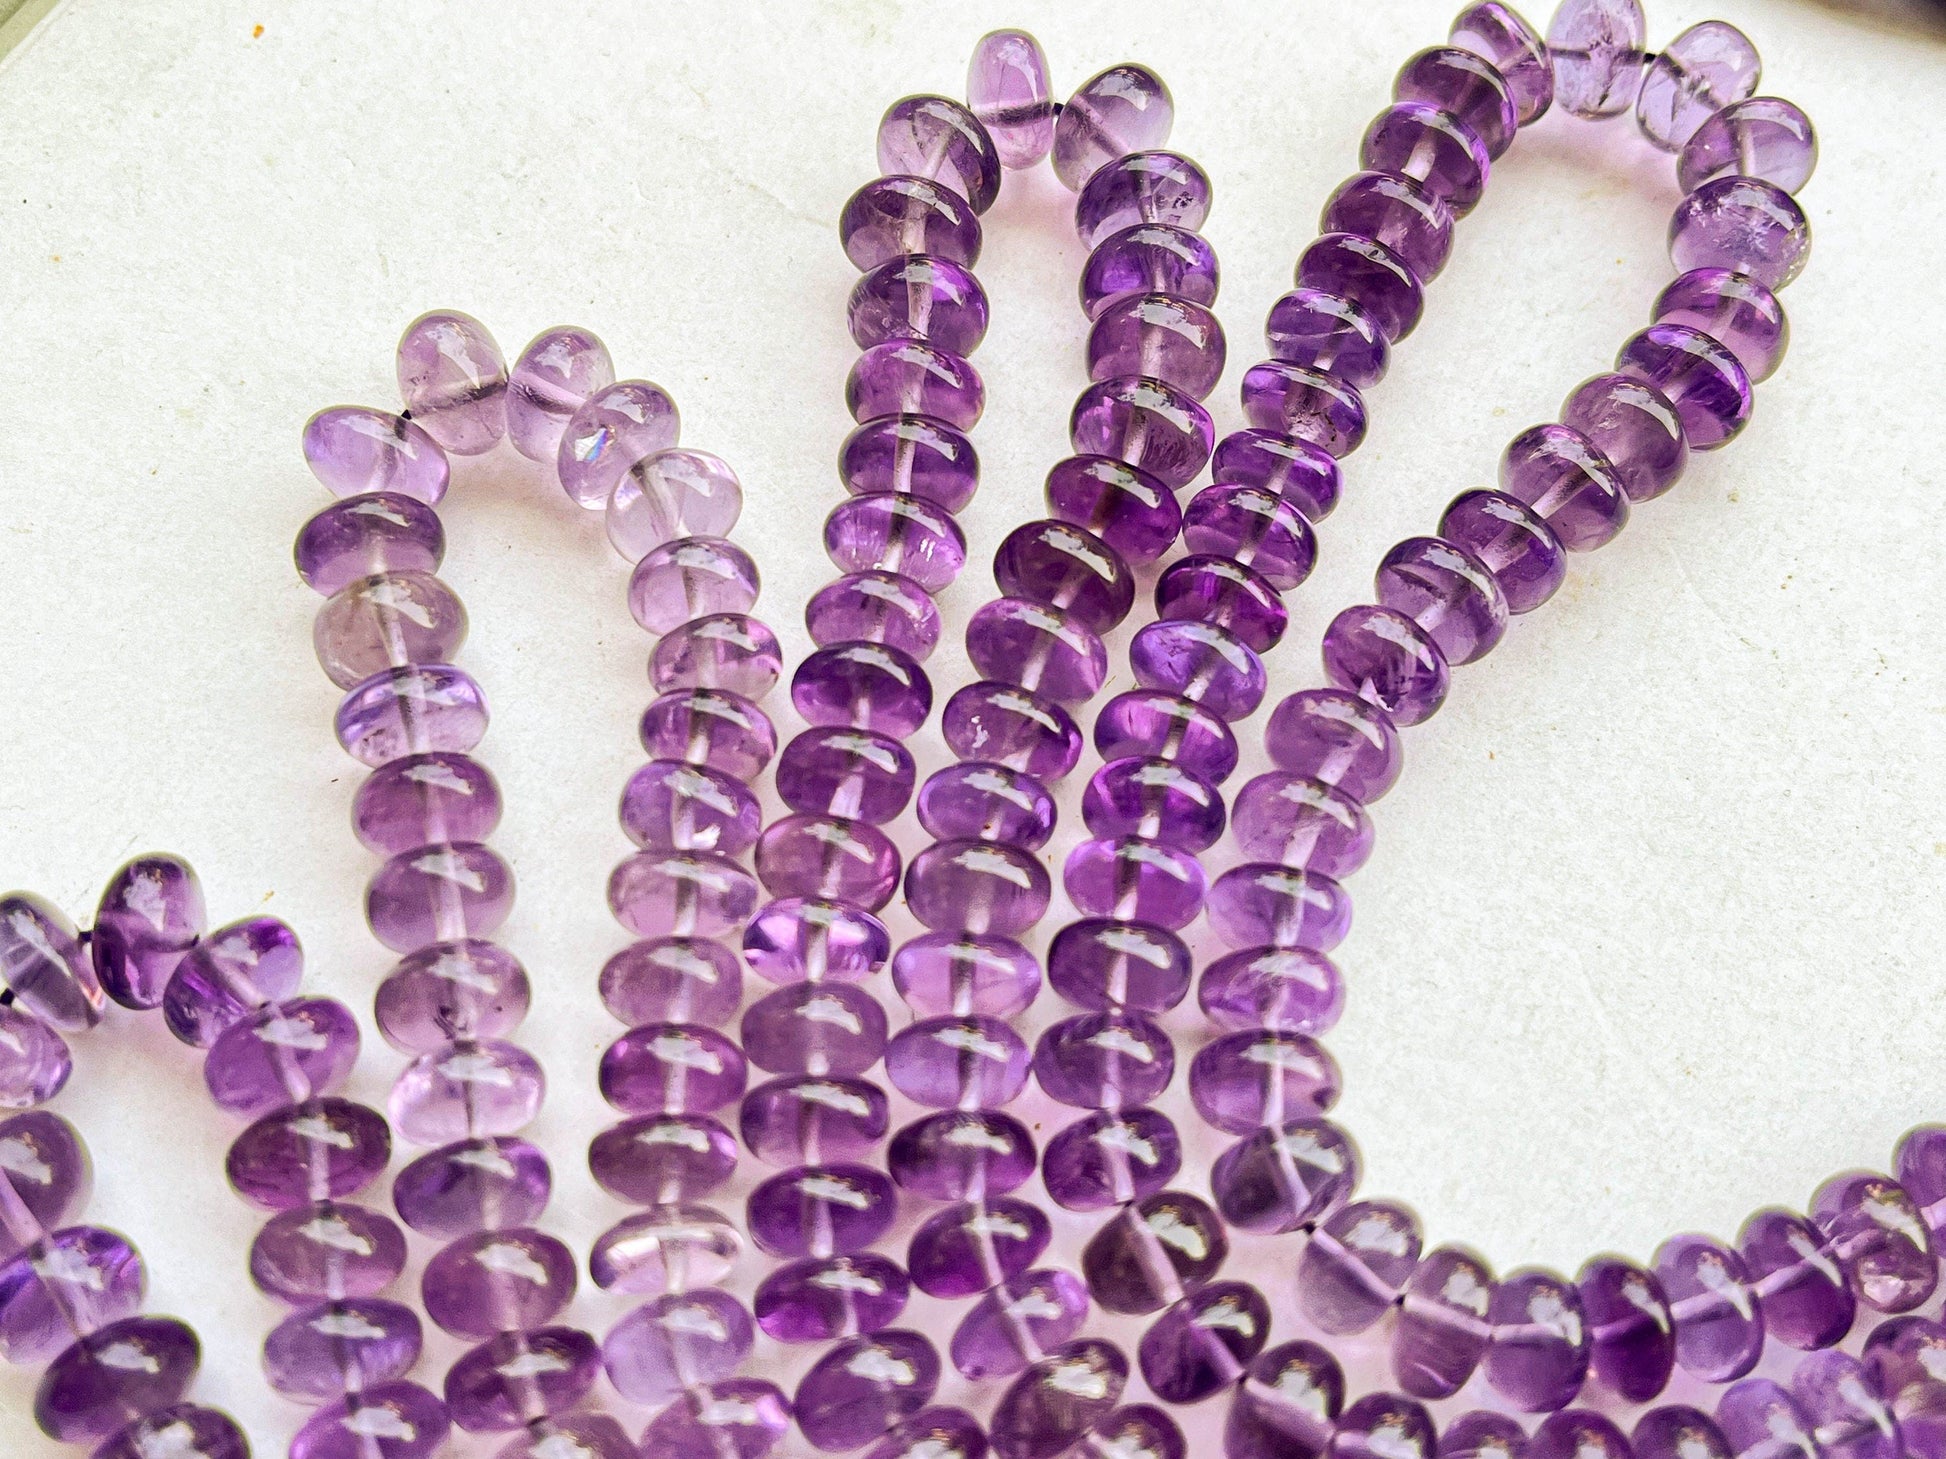 Pink Amethyst Smooth Rondelle Shape Beads | 6MM to 8MM | 16 Inch Beadsforyourjewelry